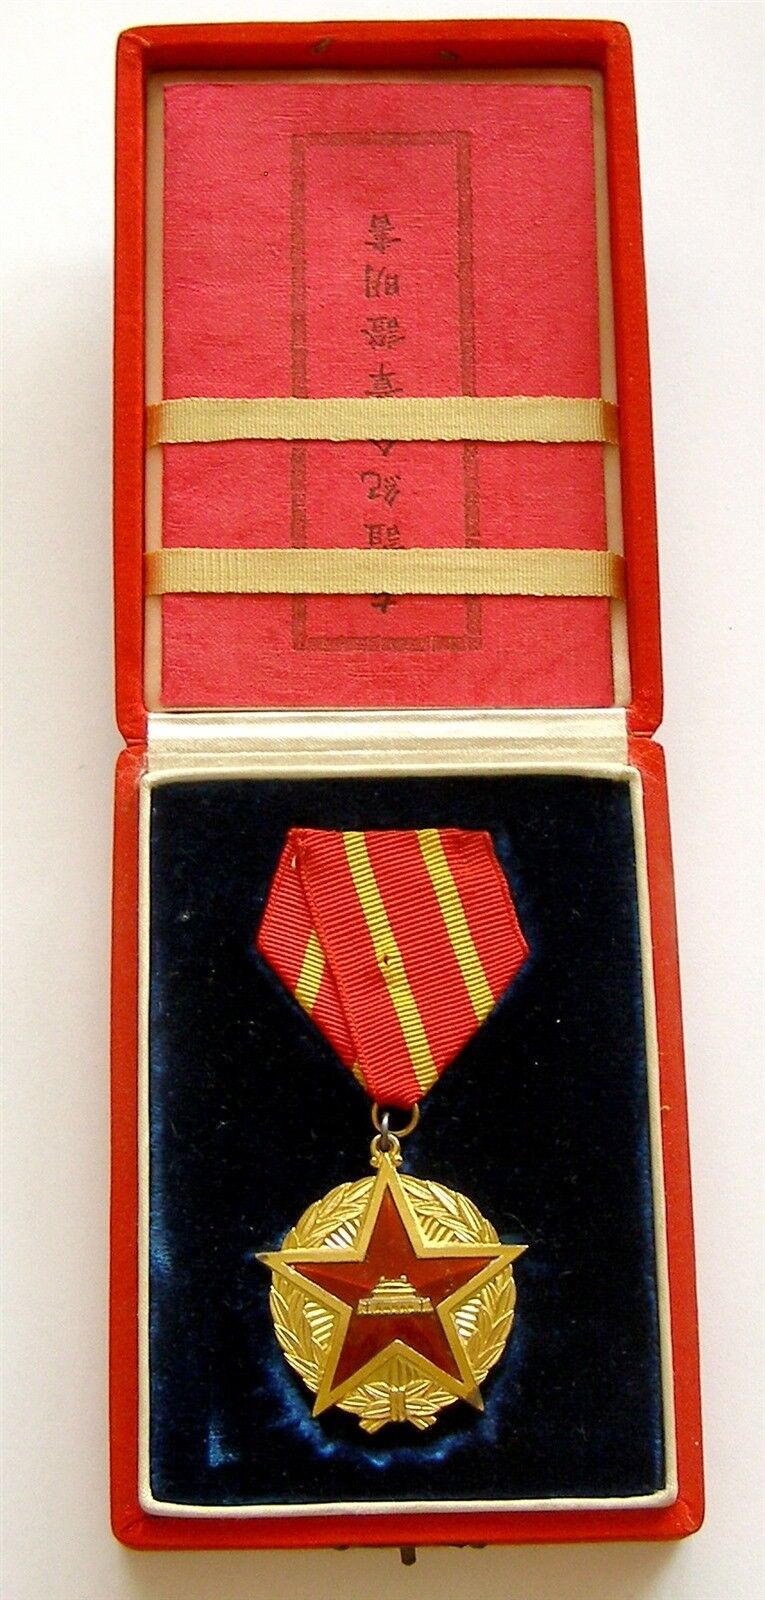 h846 China 1957 Non Soviet Friendship medal * original order with box & document